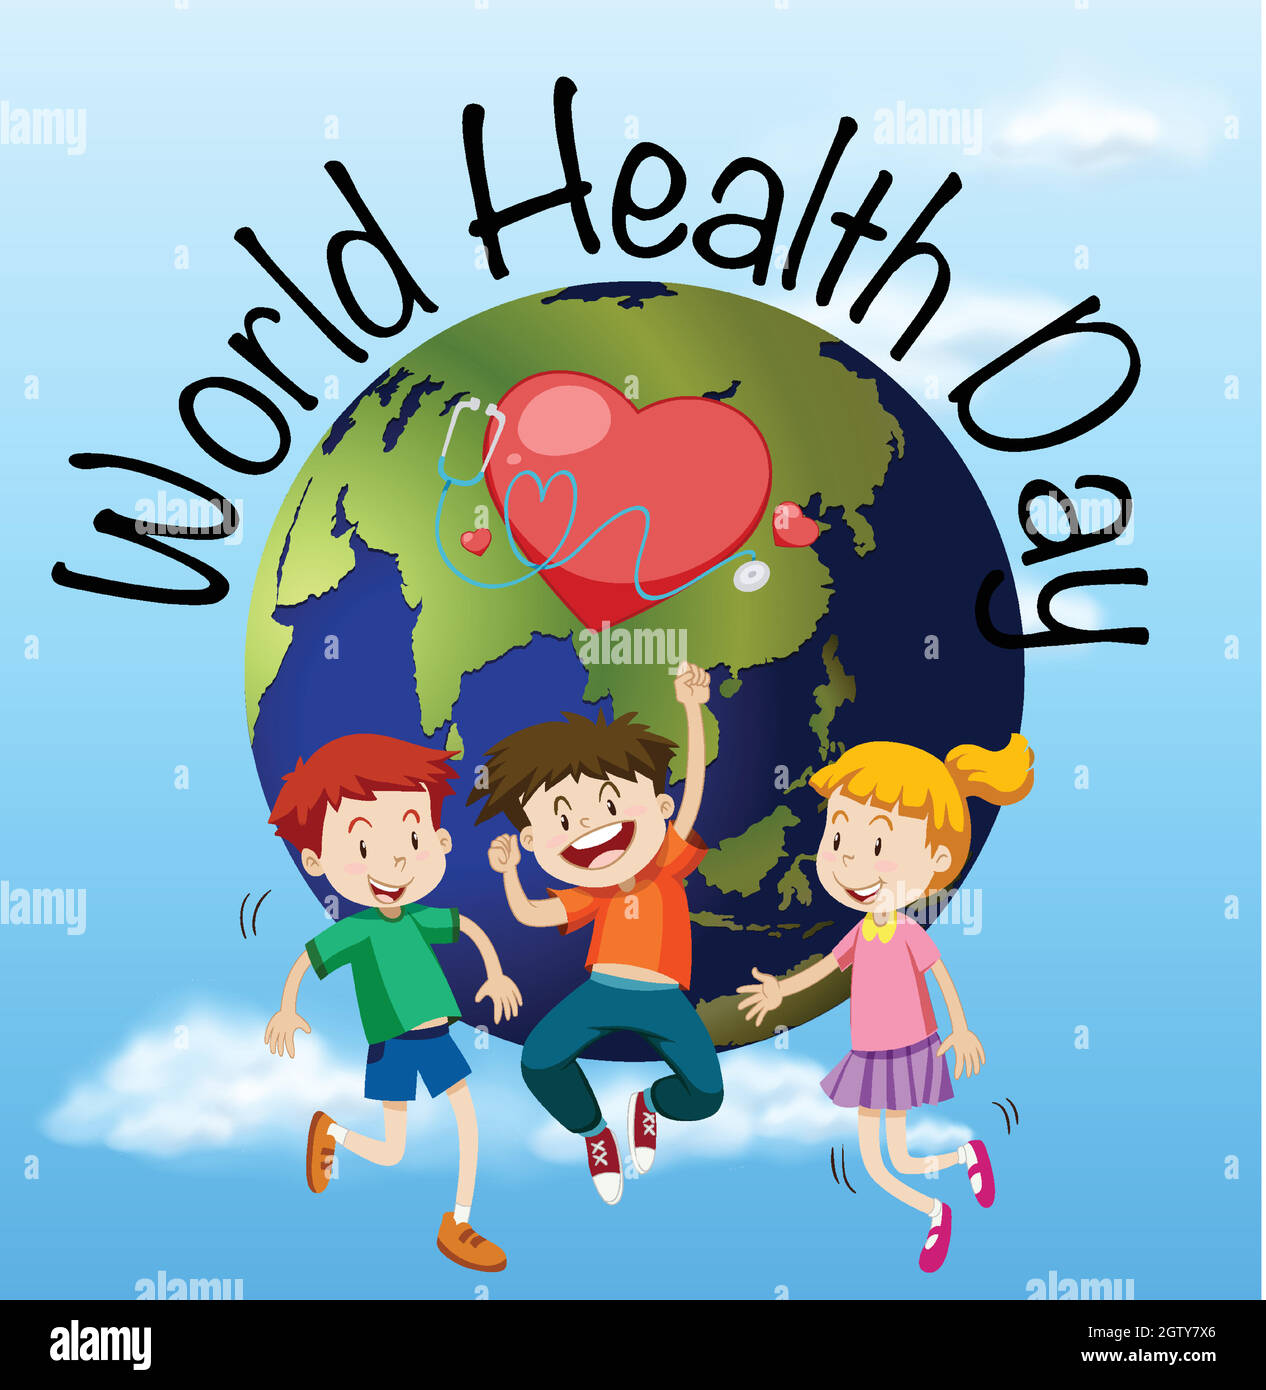 World Health Day Art 2019 Competition winners announced - in the under 16  years age group, Venupama Yethmini Athapattu from Sri Lanka won the first  prize. The second prize is shared by